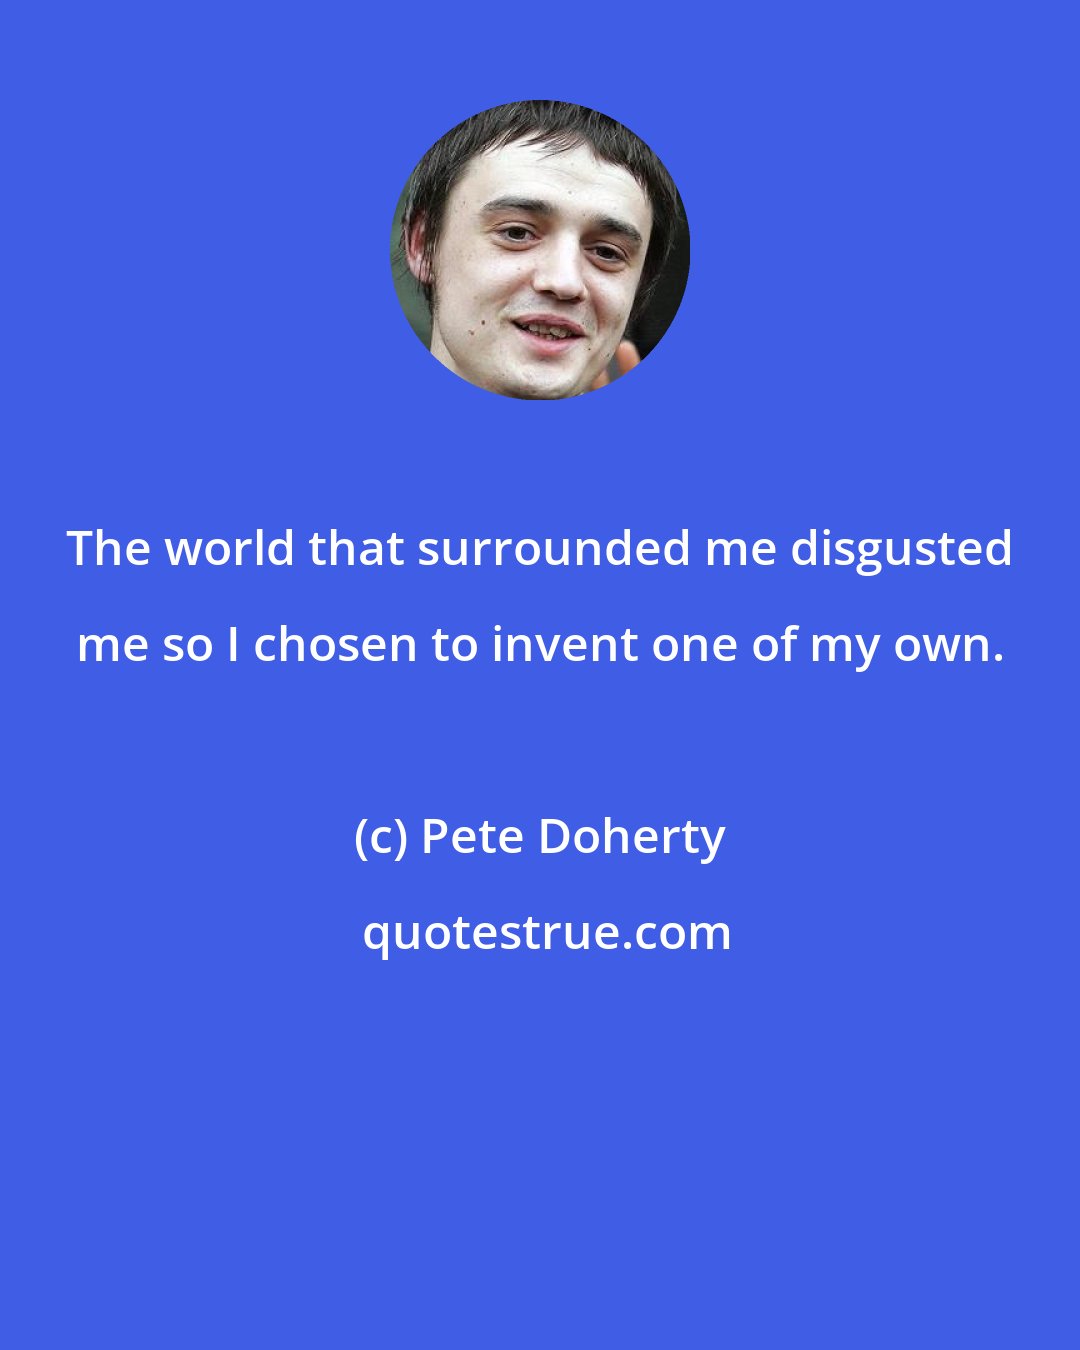 Pete Doherty: The world that surrounded me disgusted me so I chosen to invent one of my own.